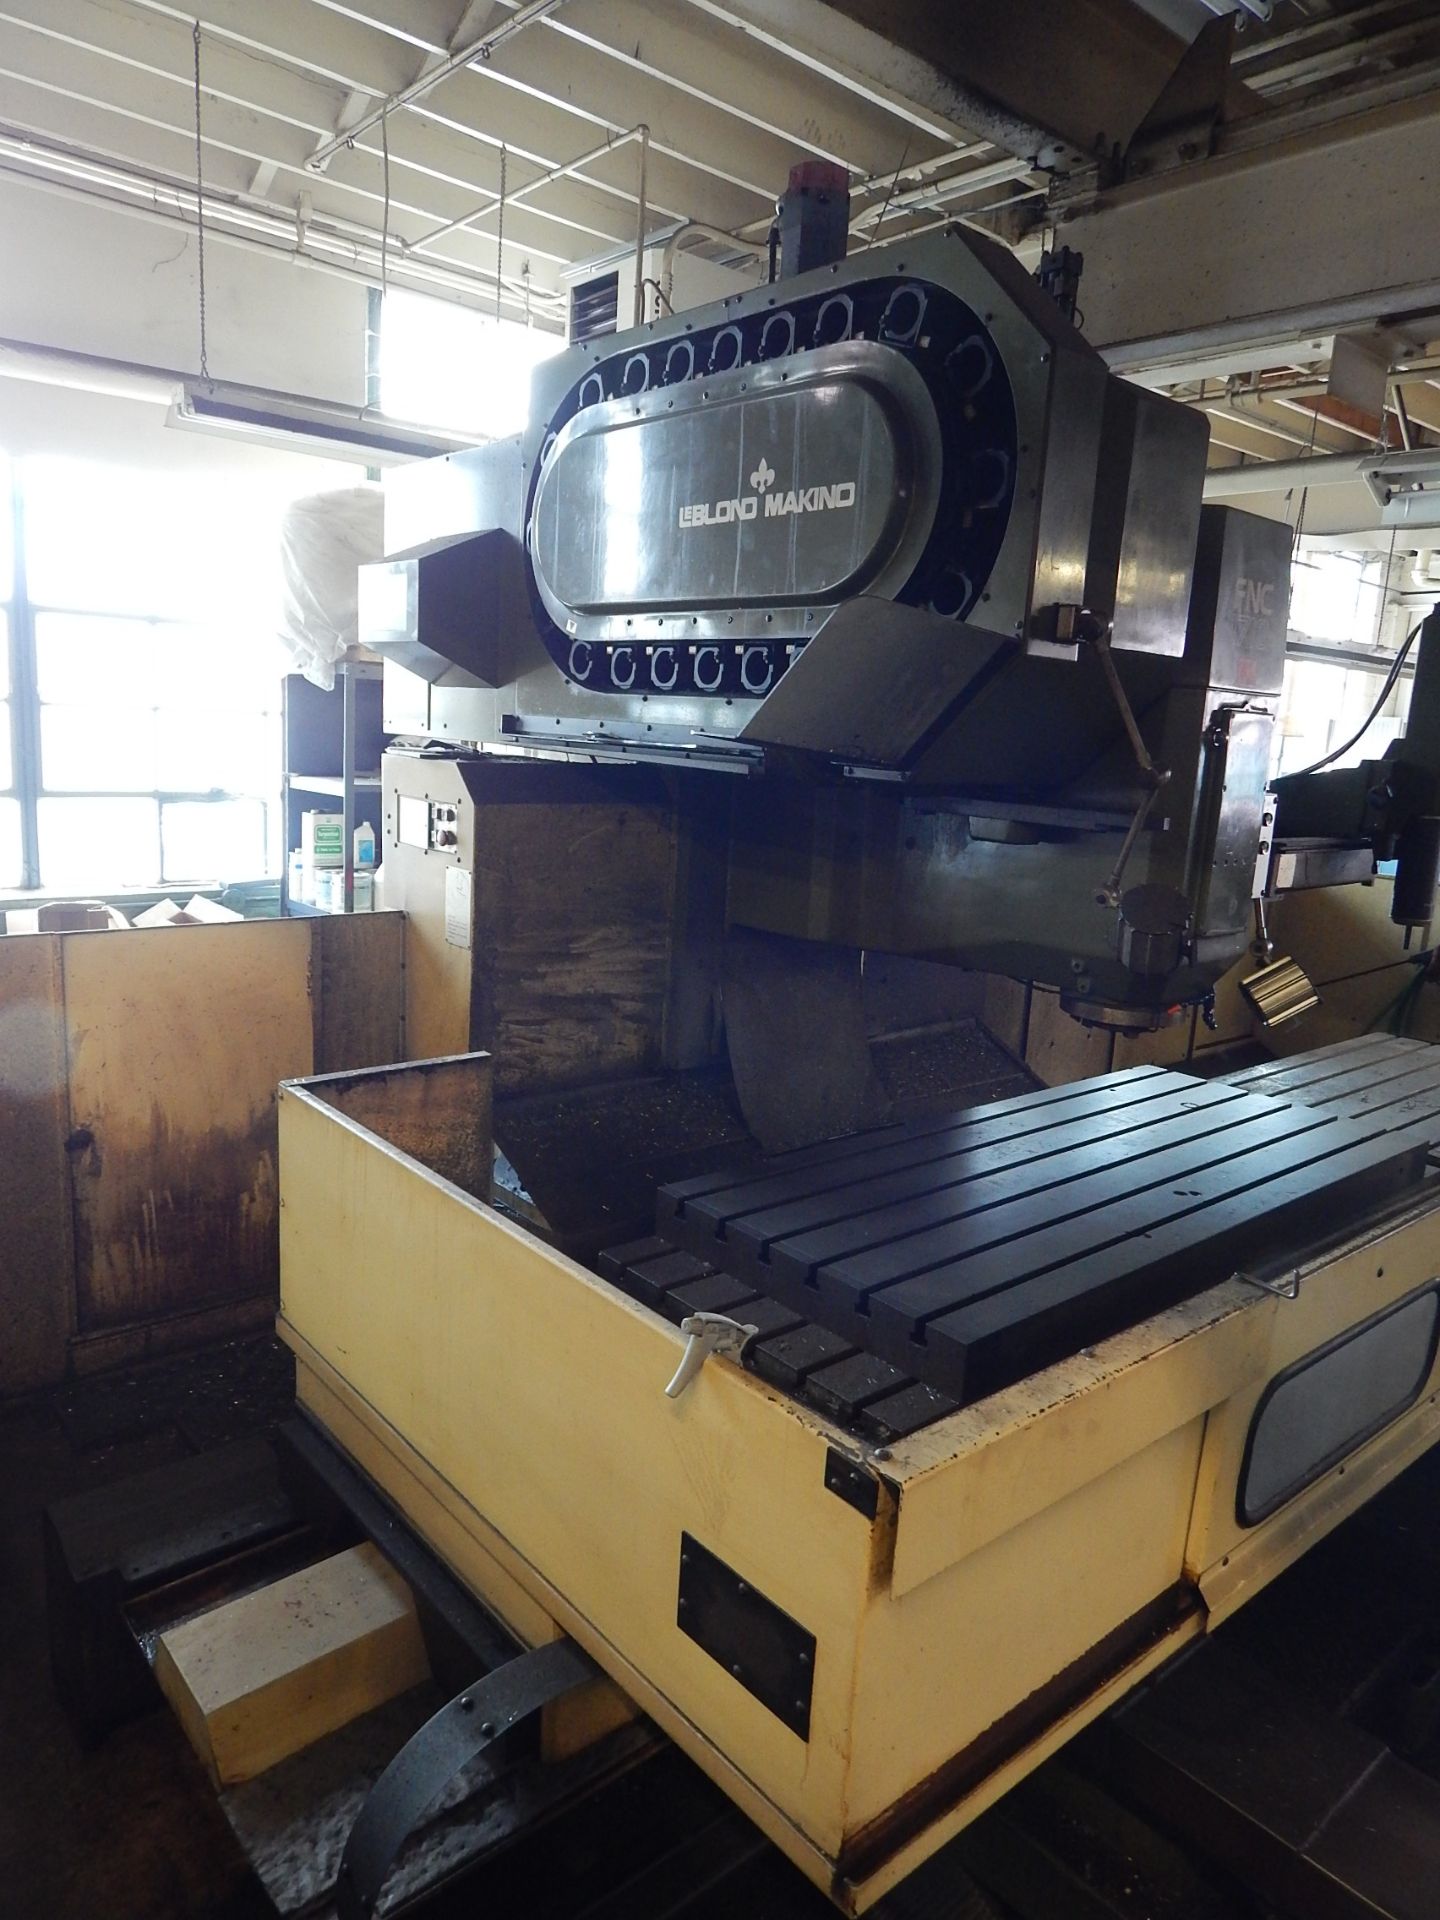 Leblond Makino Model FNC1710 CNC Vertical Machining Center/Copy Mill, S/N A-93-443, New 1993, - Image 9 of 21